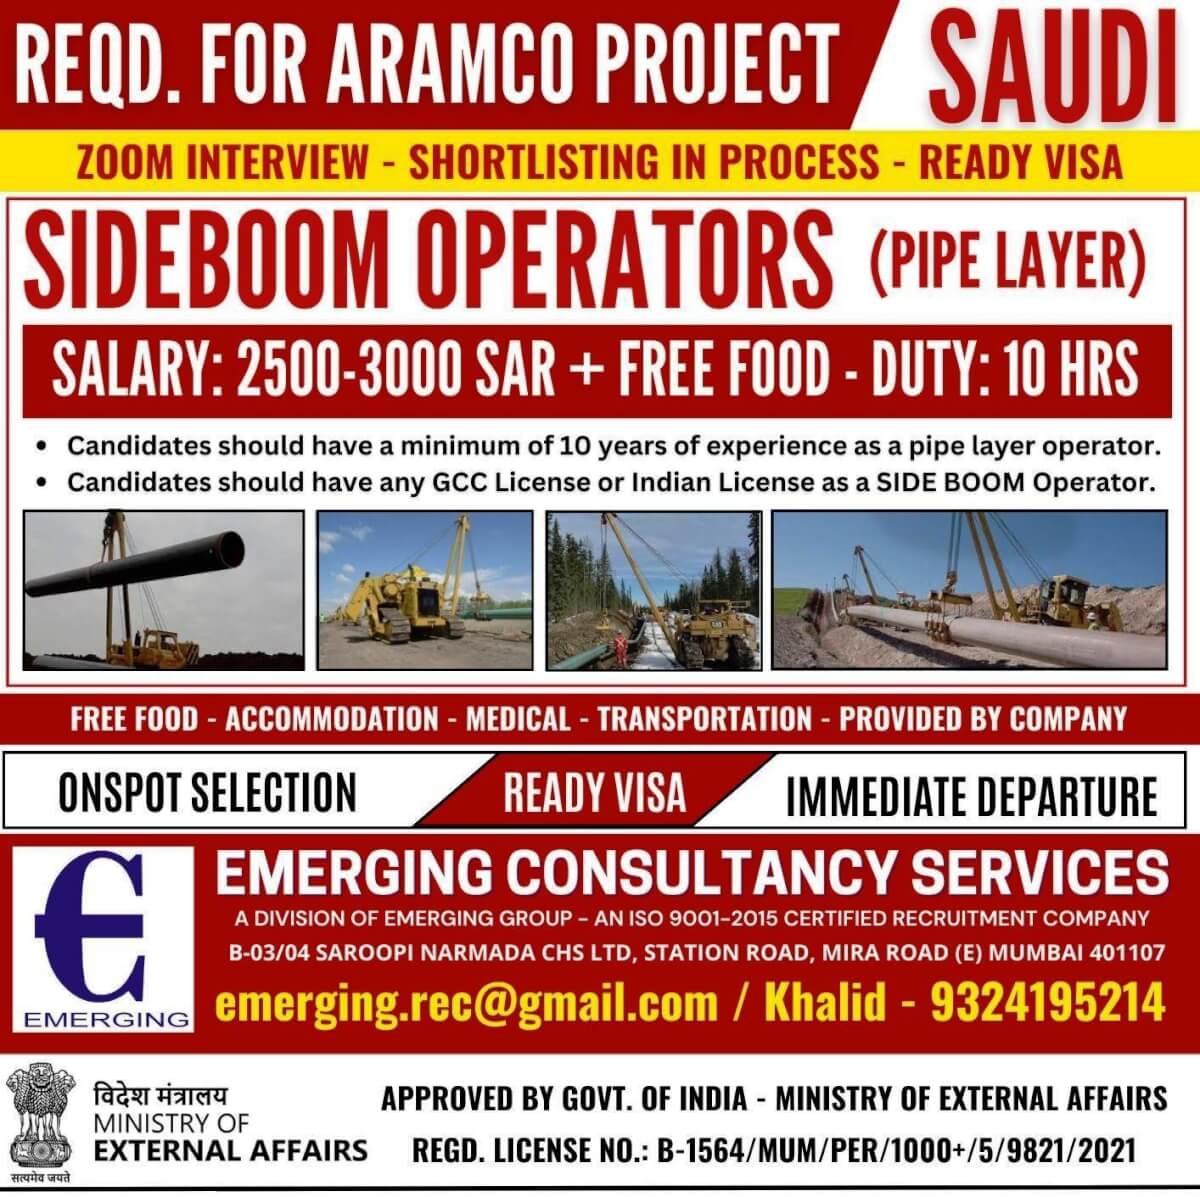 URGENTLY REQUIRED FOR ARAMCO PROJECT IN SAUDI ARABIA - SHORTLISTING IN PROCESS - READY VISA